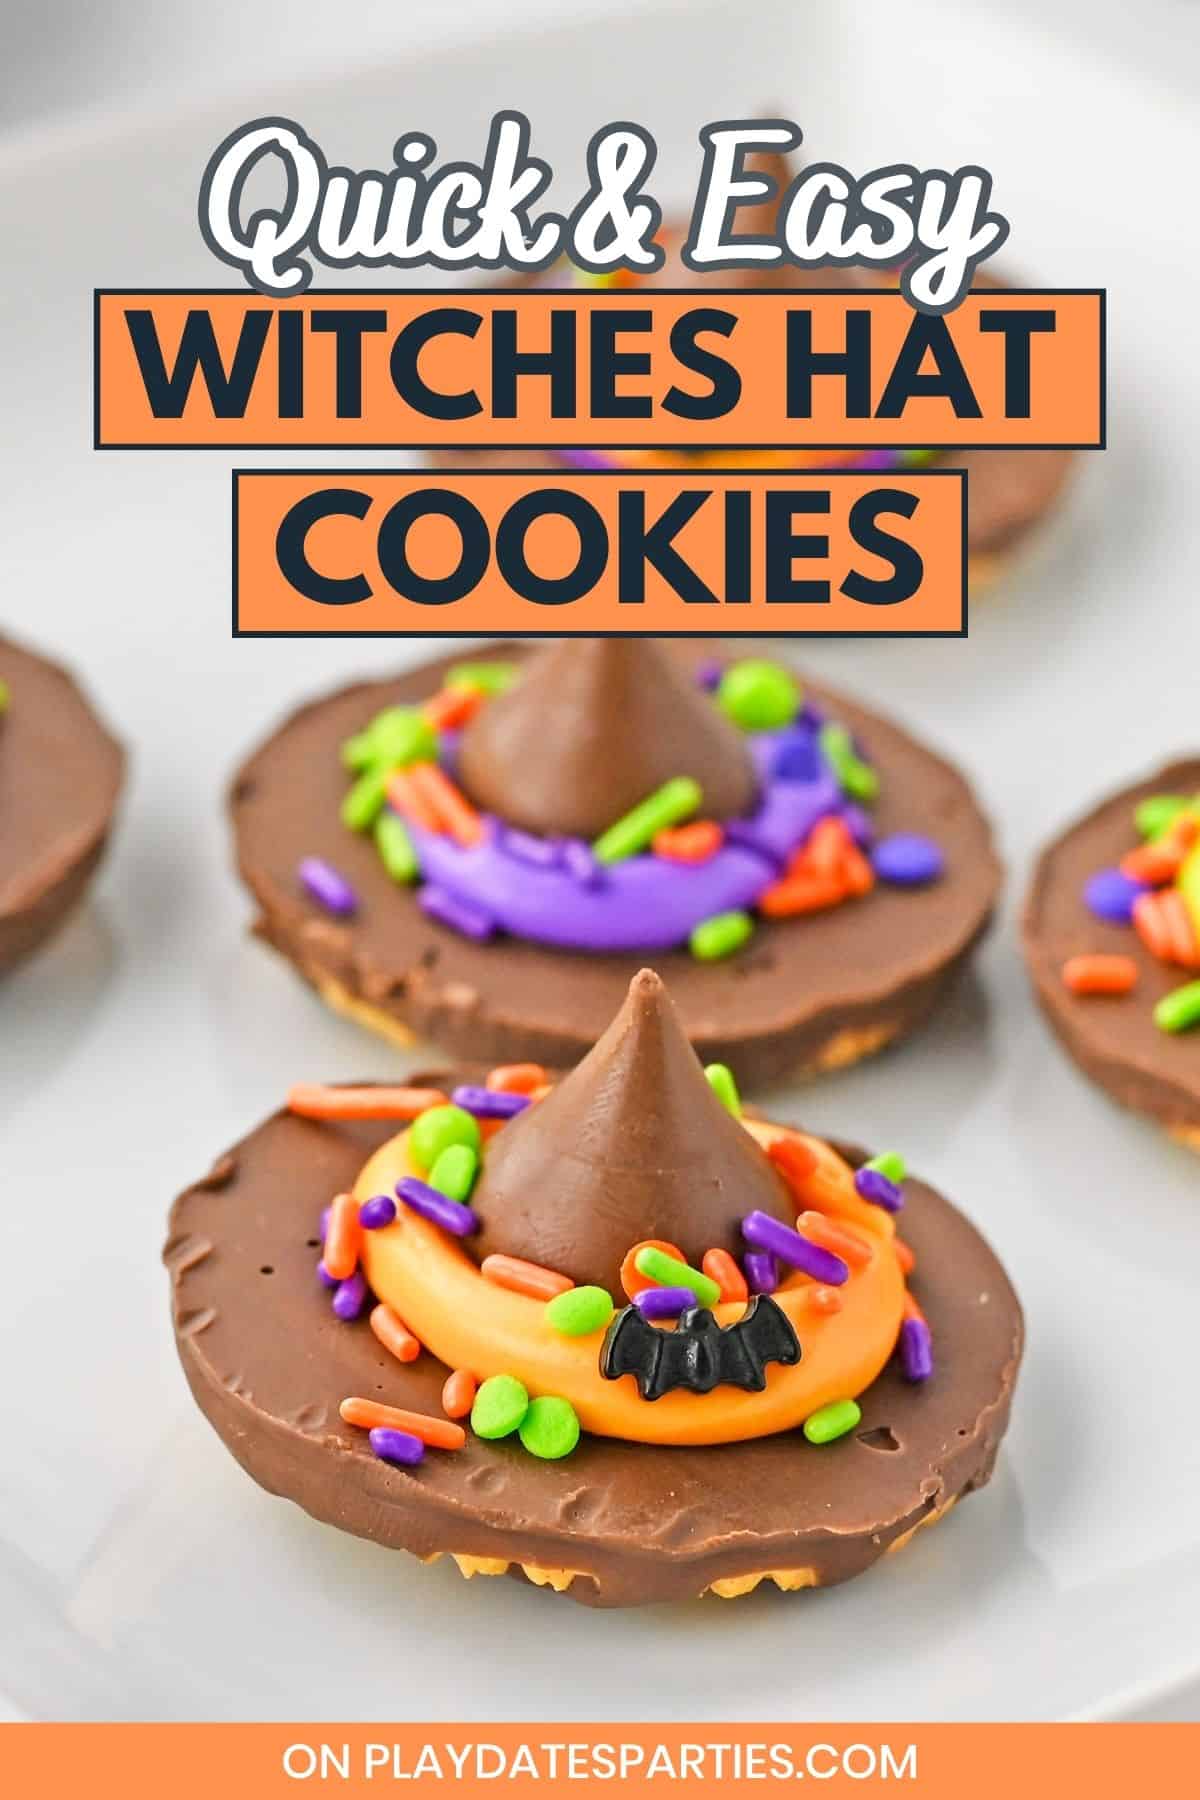 Witch Hat Cookies pin image.